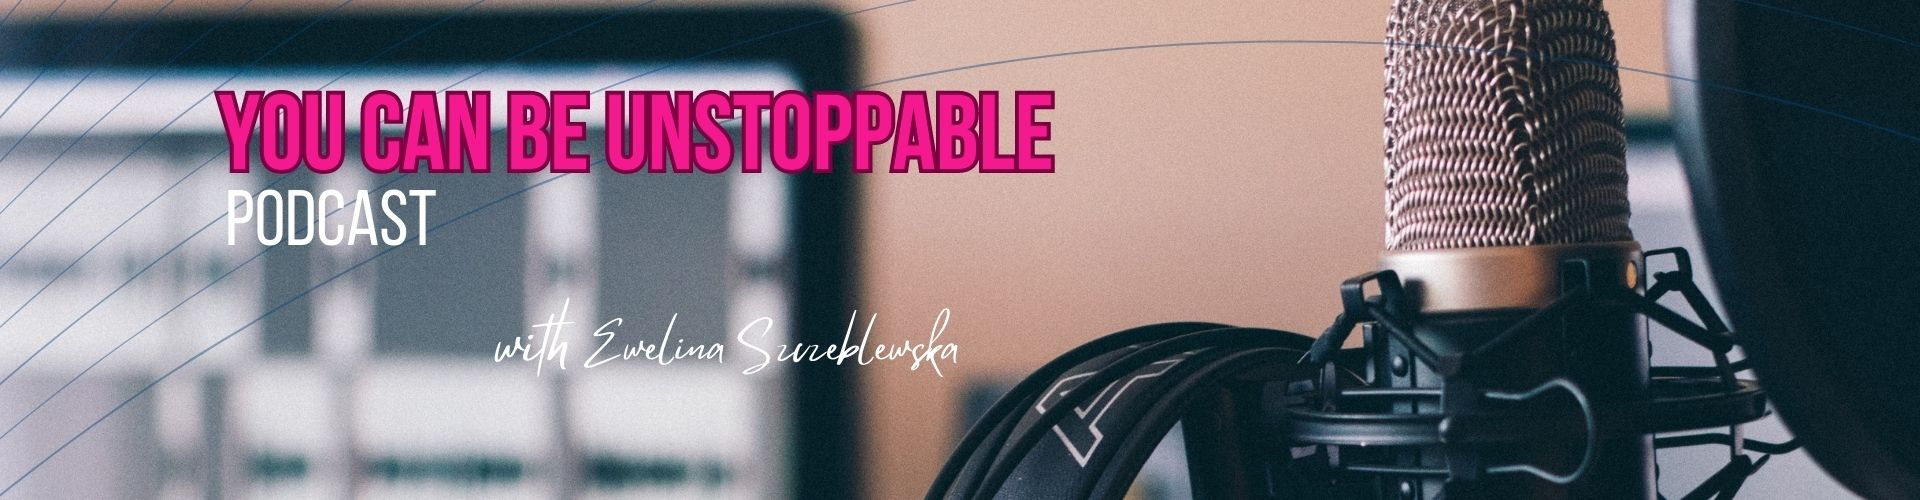 You Can Be Unstoppable